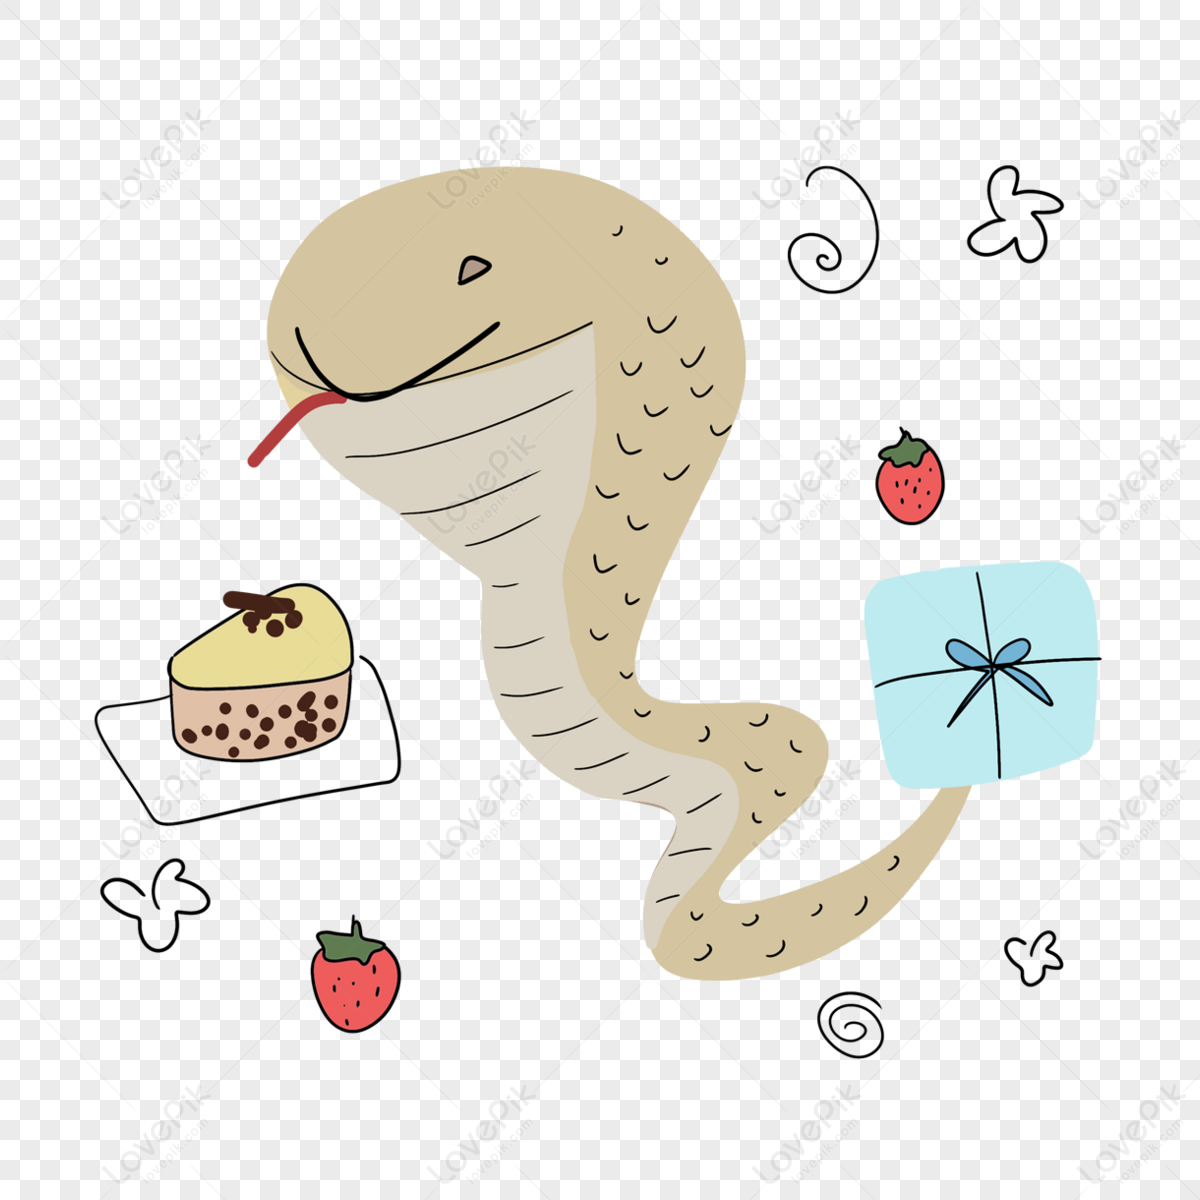 Idk if this belongs but I drew a corn snake (: Still working on learning to  color digitally : r/cornsnakes